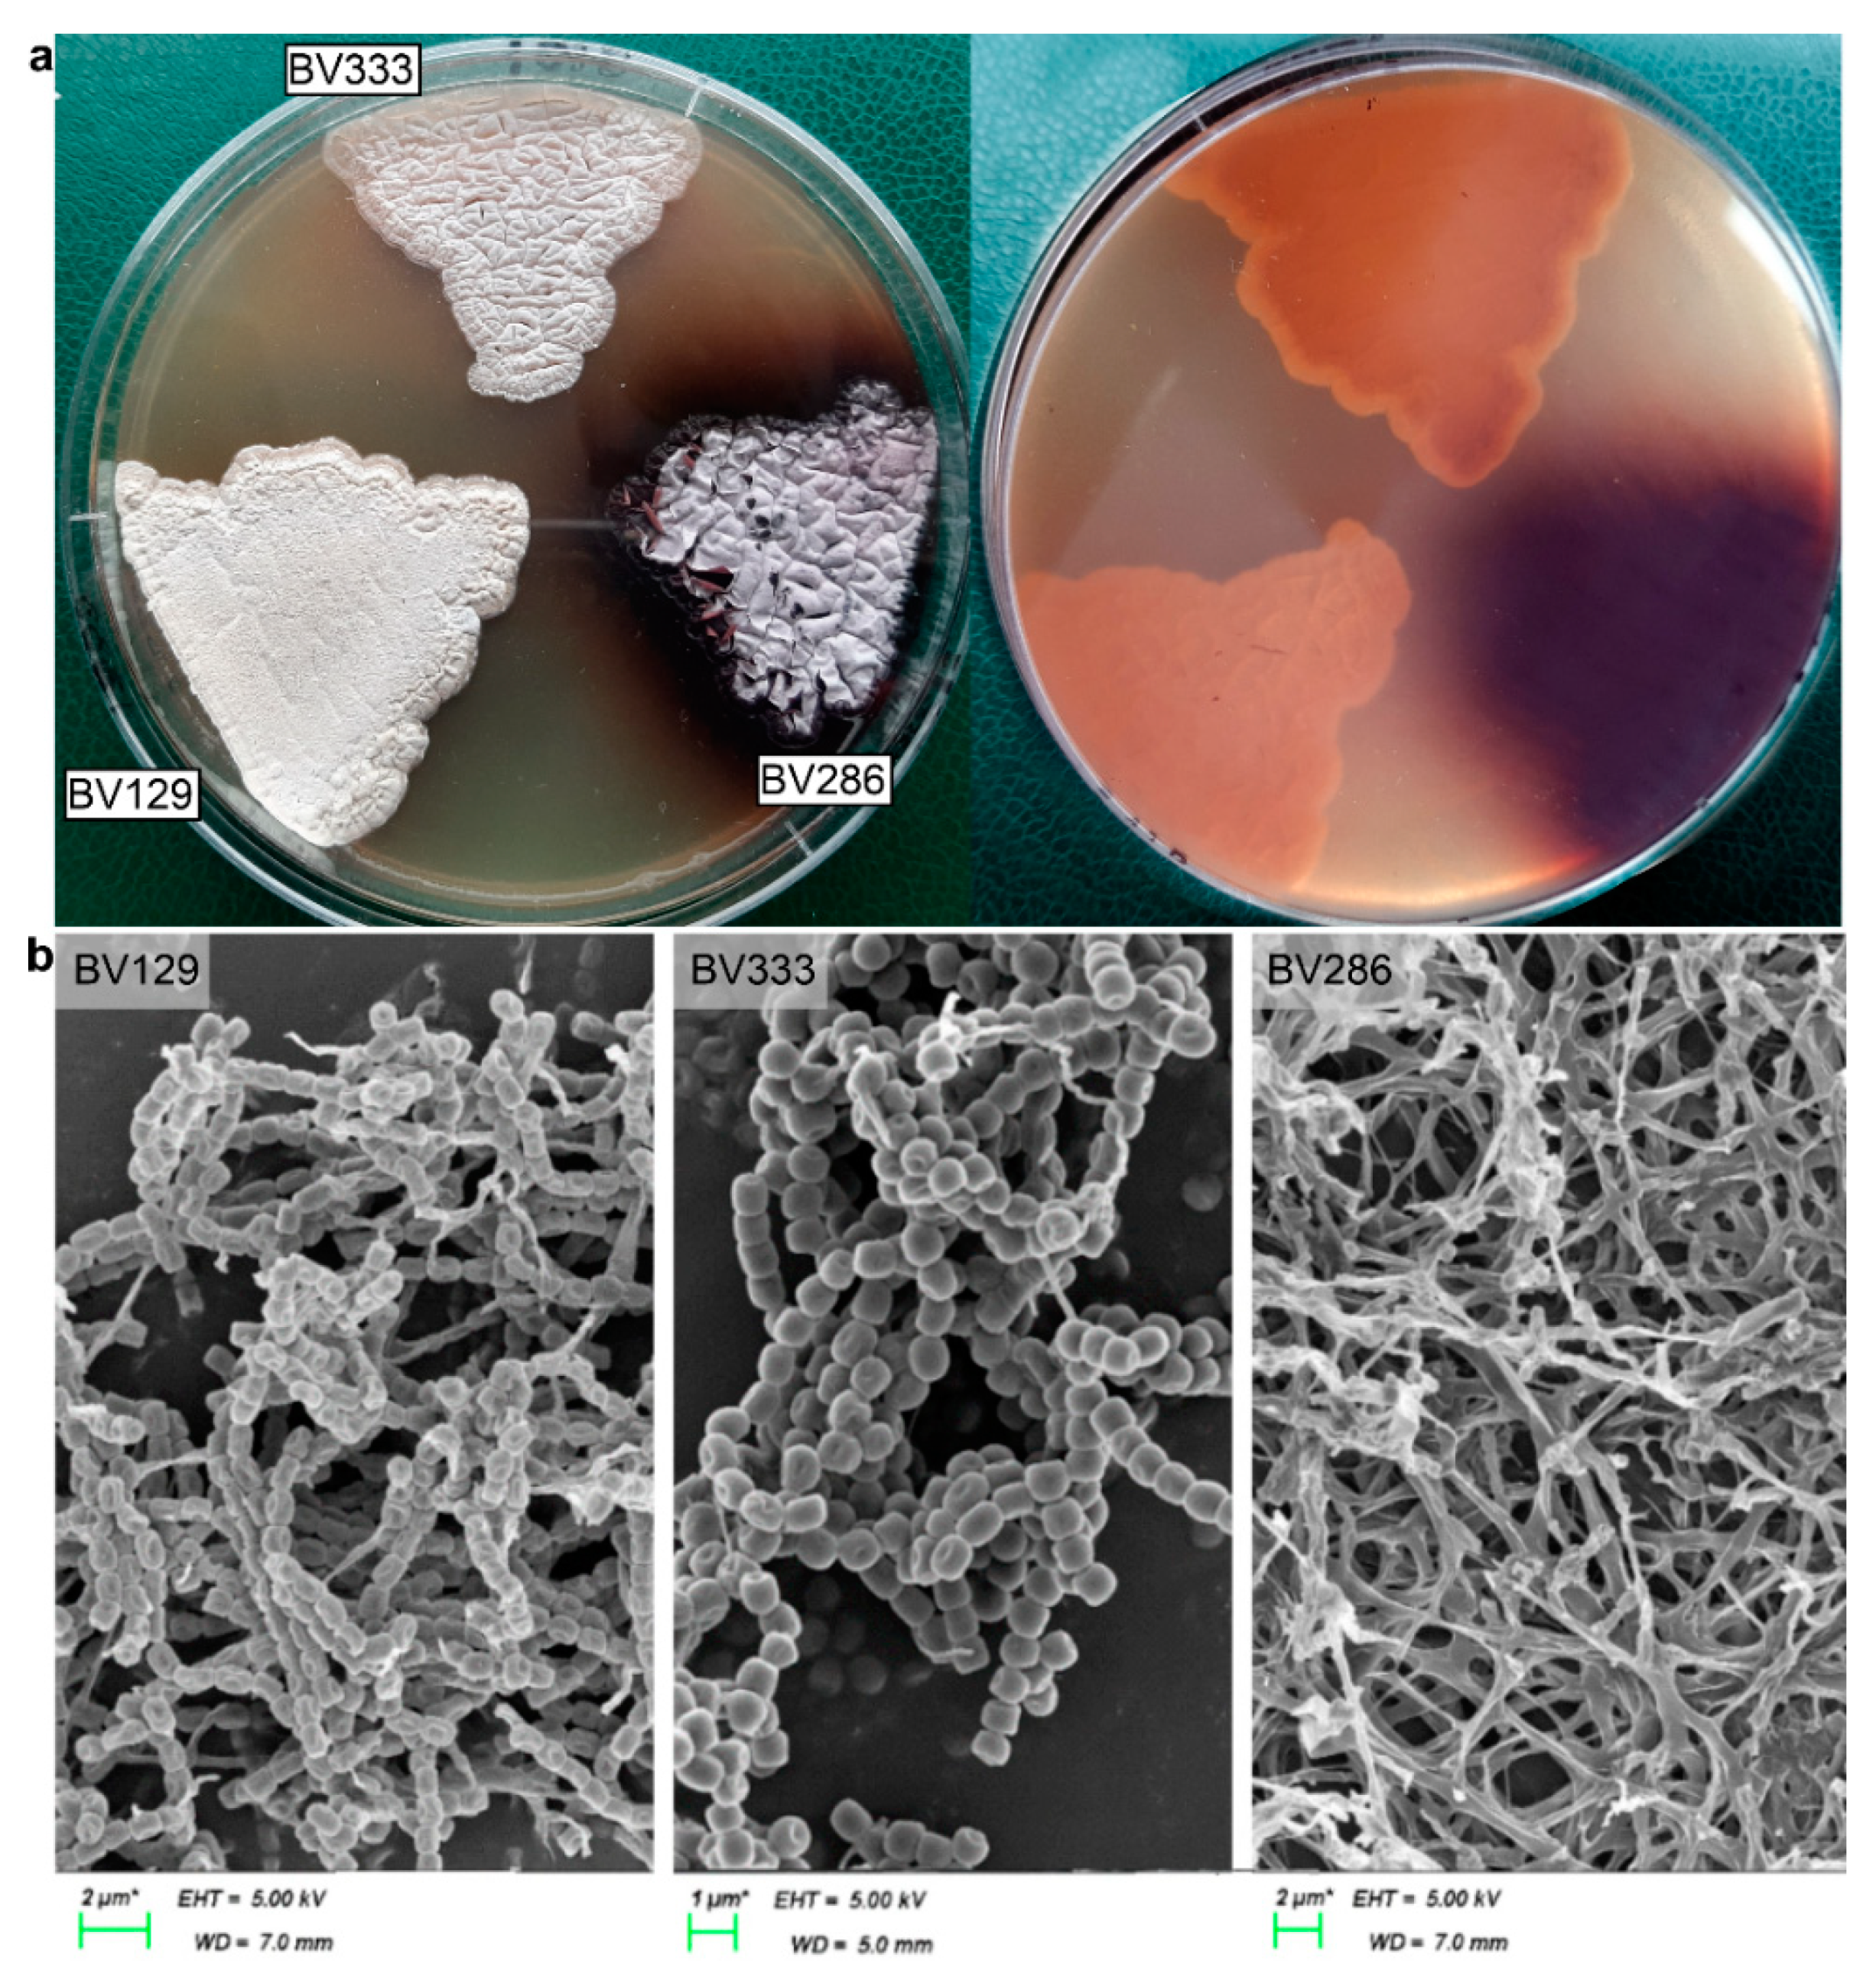 Catalysts | Free Full-Text | Novel Transaminase and Laccase from  Streptomyces spp. Using Combined Identification Approaches | HTML